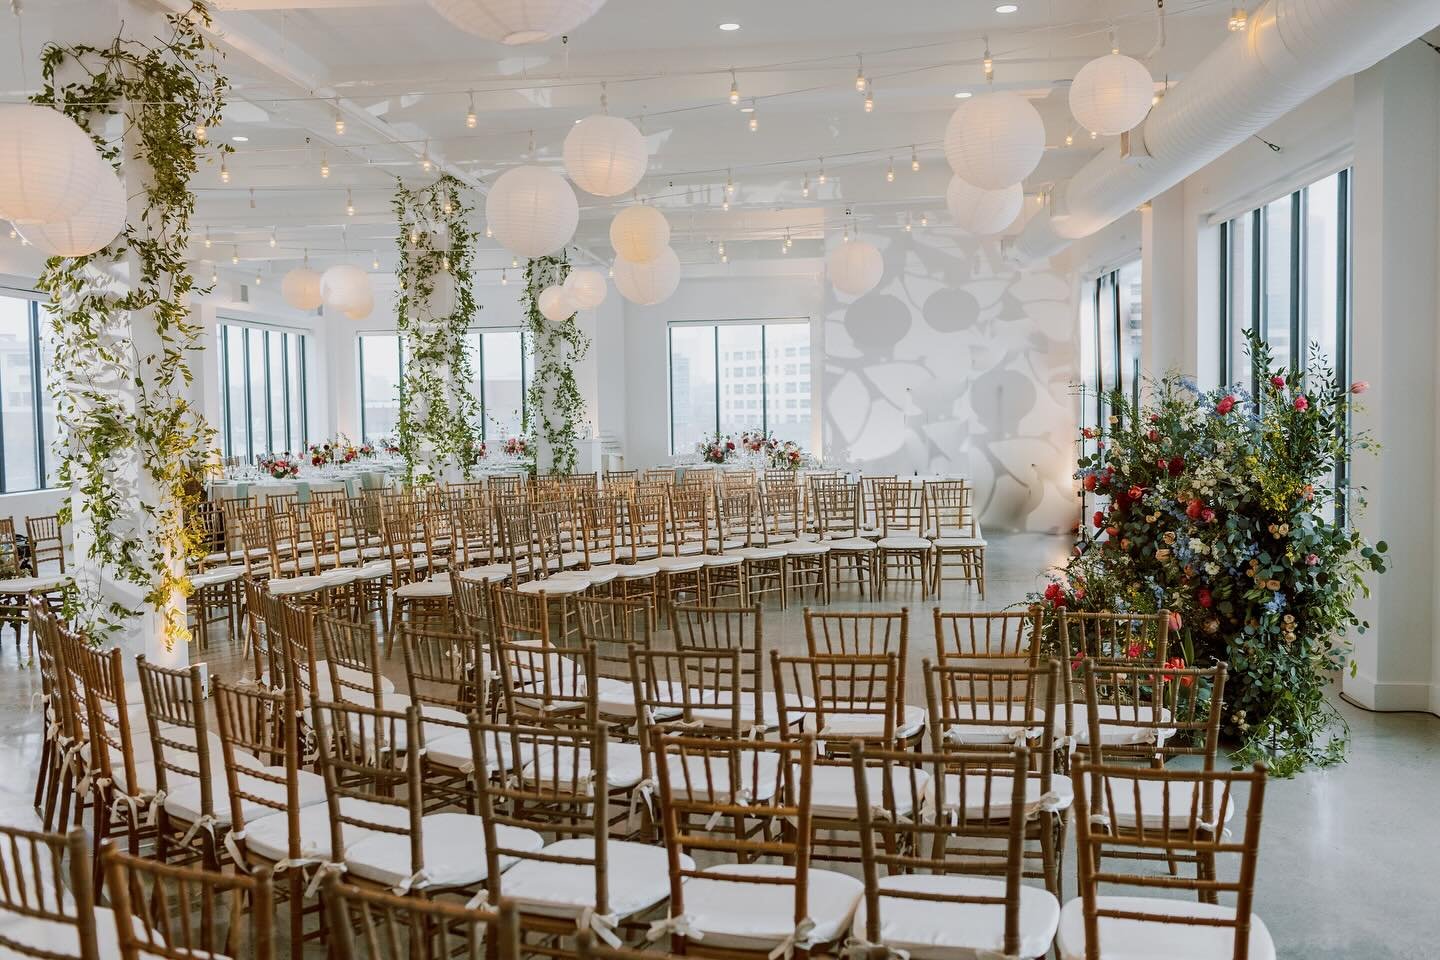 Embracing timeless love with Amanda &amp; Archit❤️. A celebration of elegance and romance 😍✨
&bull;
Rentals: @broadwaypartyrentals 
Caterer: @ste_events 
Florist: @wildfloraldesigns 
Hair &amp; make up @facetimebeauty 
Lighting: @ulsnyc 
Photos: @el